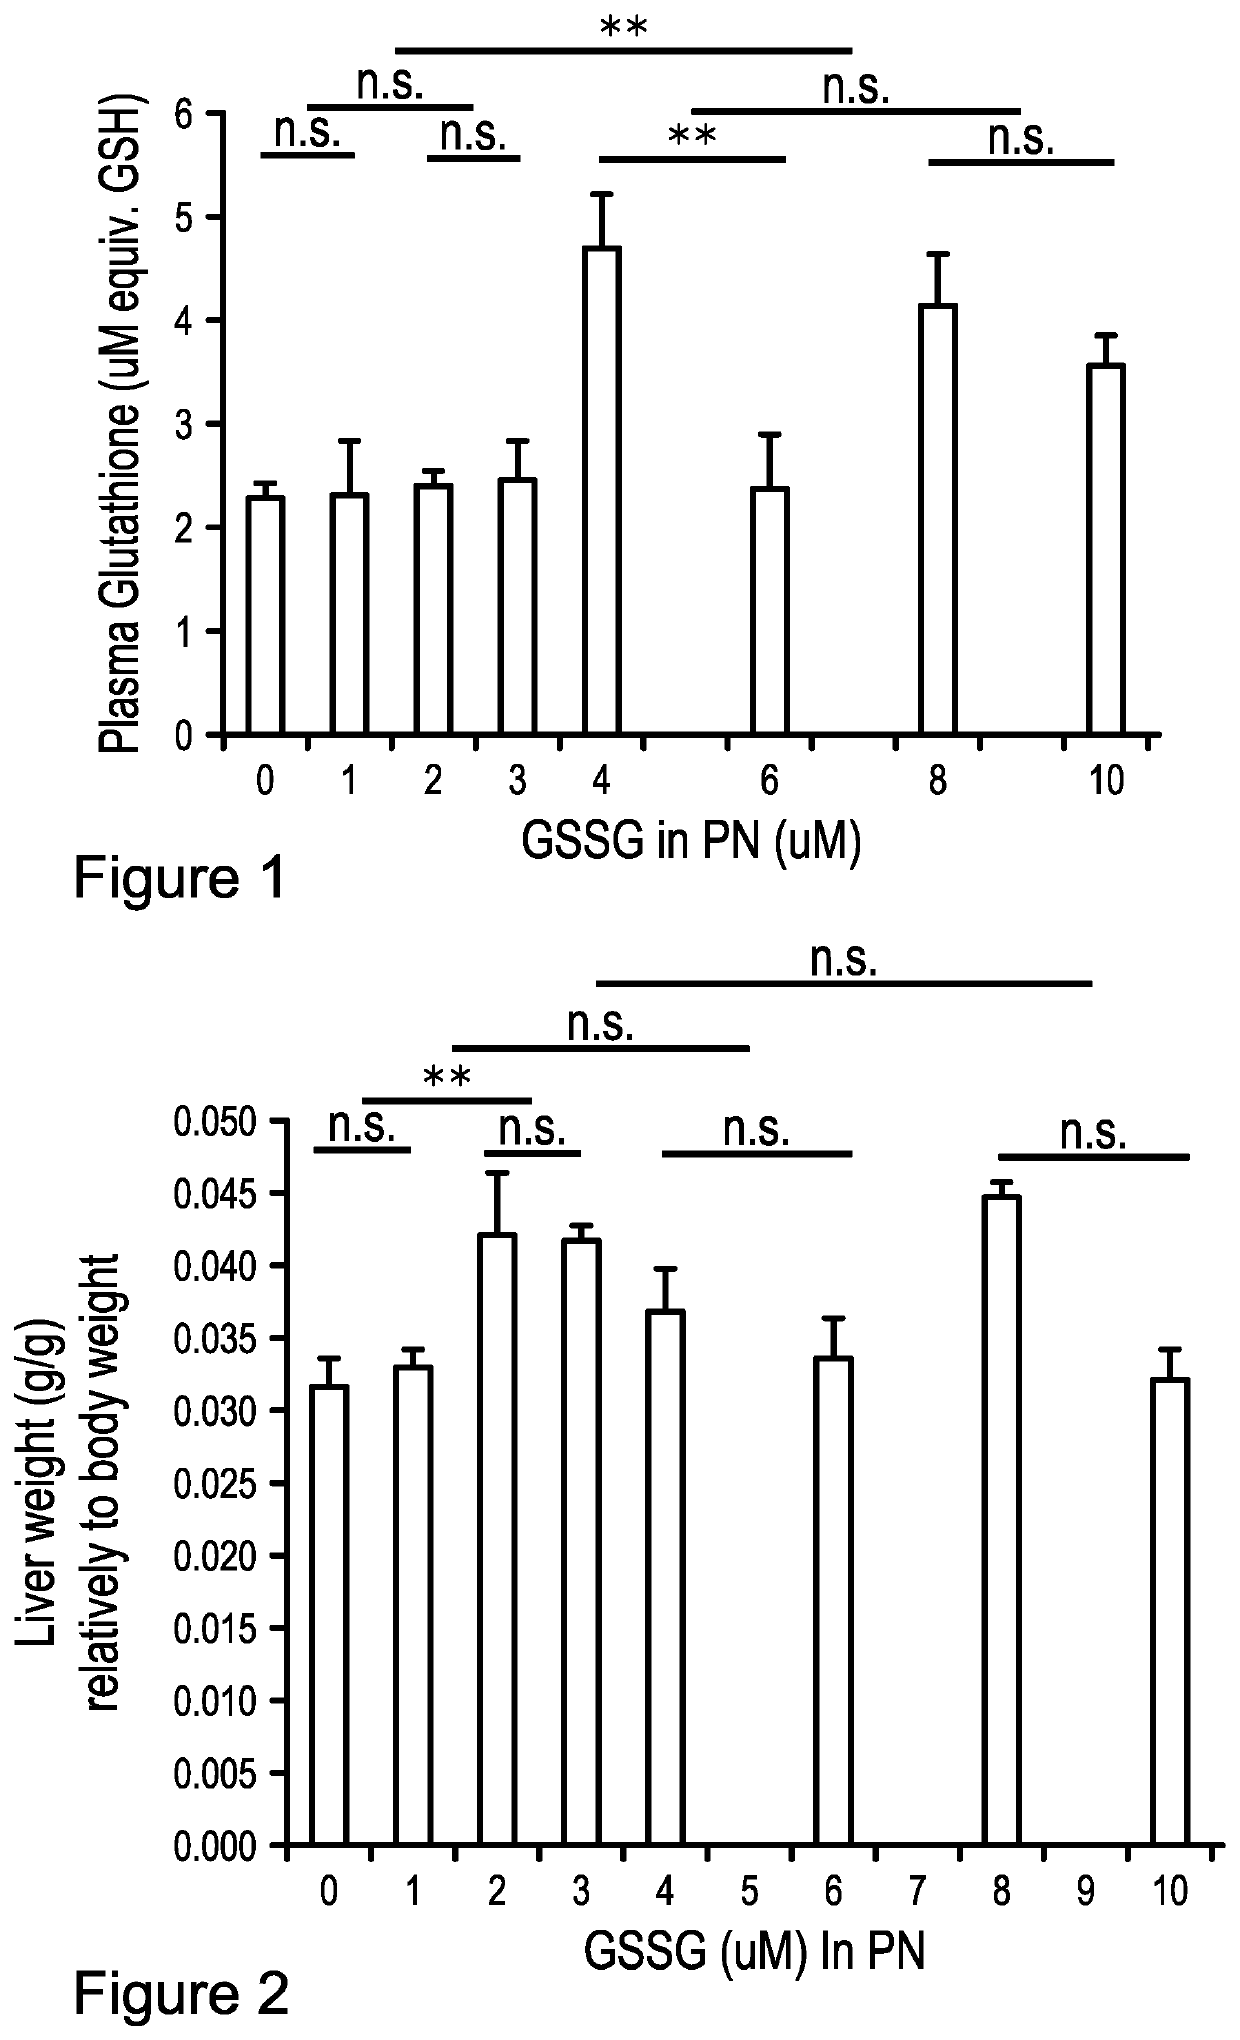 Glutathione disulfide in parenteral nutrition for maintaining or increasing protein synthesis